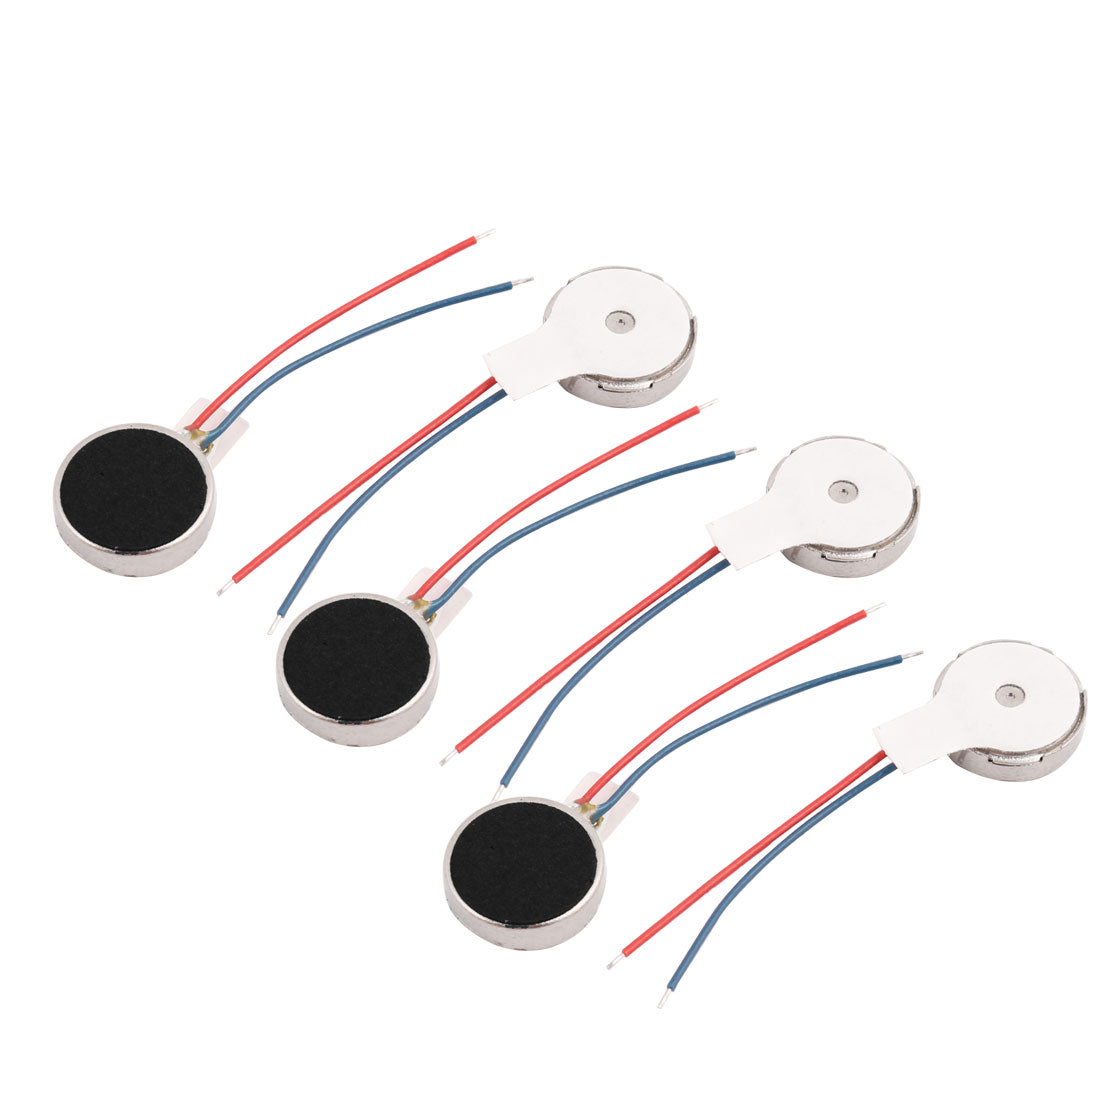 uxcell Uxcell 6 Pcs DC 3V 10 mm Dia Mobile Phone Coin Flat Vibrating Vibration Motor w Wire